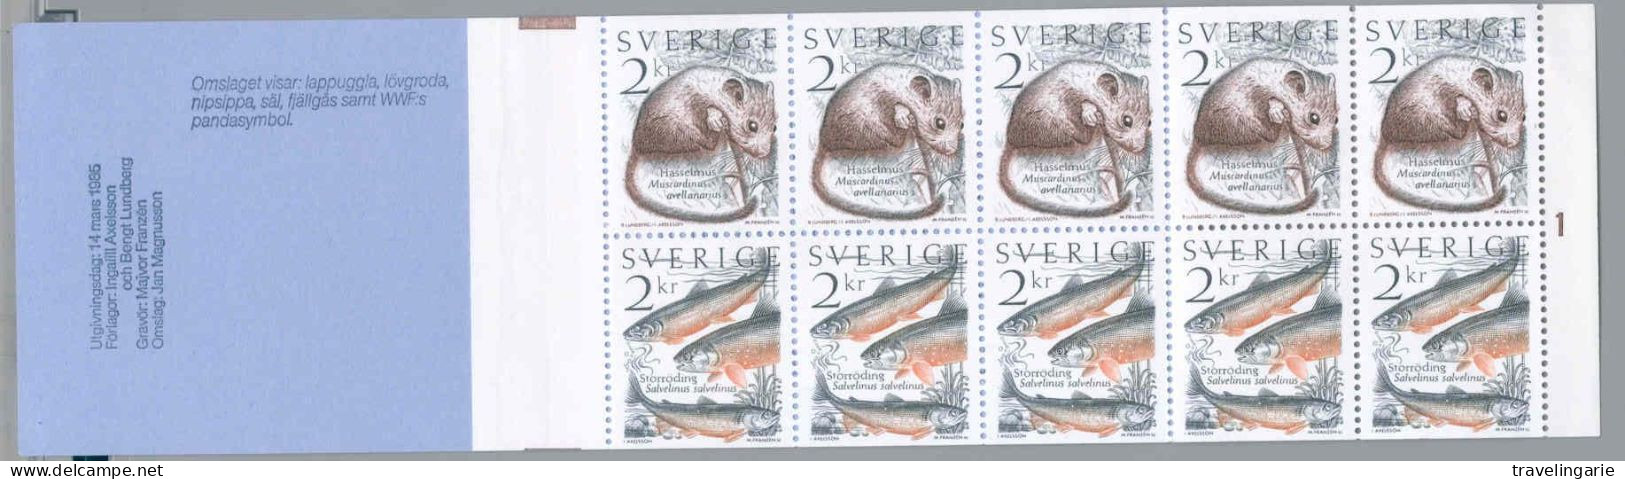 Sweden 1985 Stamp Booklet Living Nature With WWF Panda On Cover MNH ** - Neufs